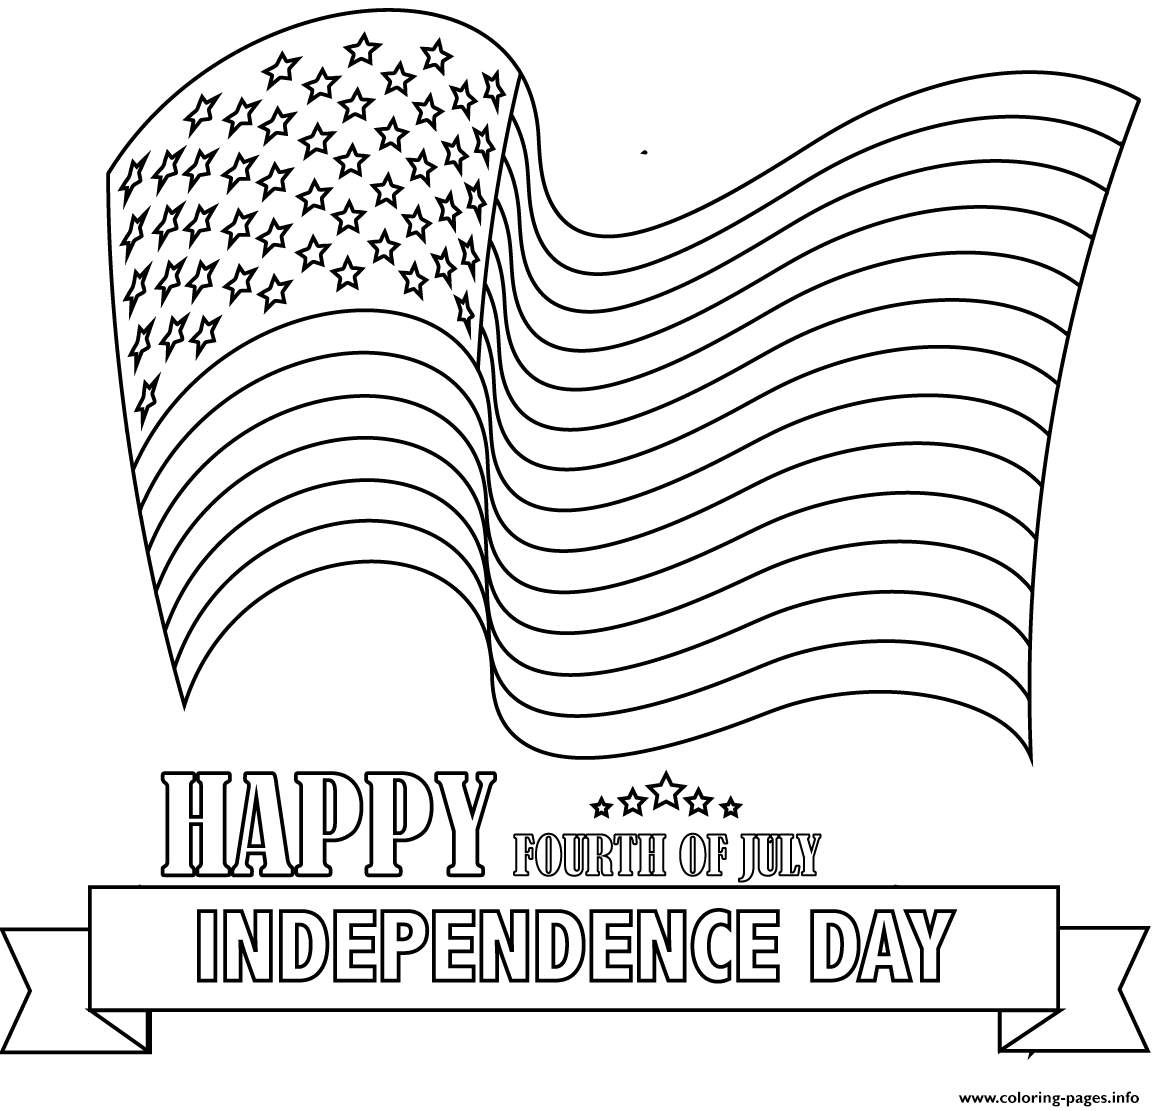 Happy Fourth Of July coloring